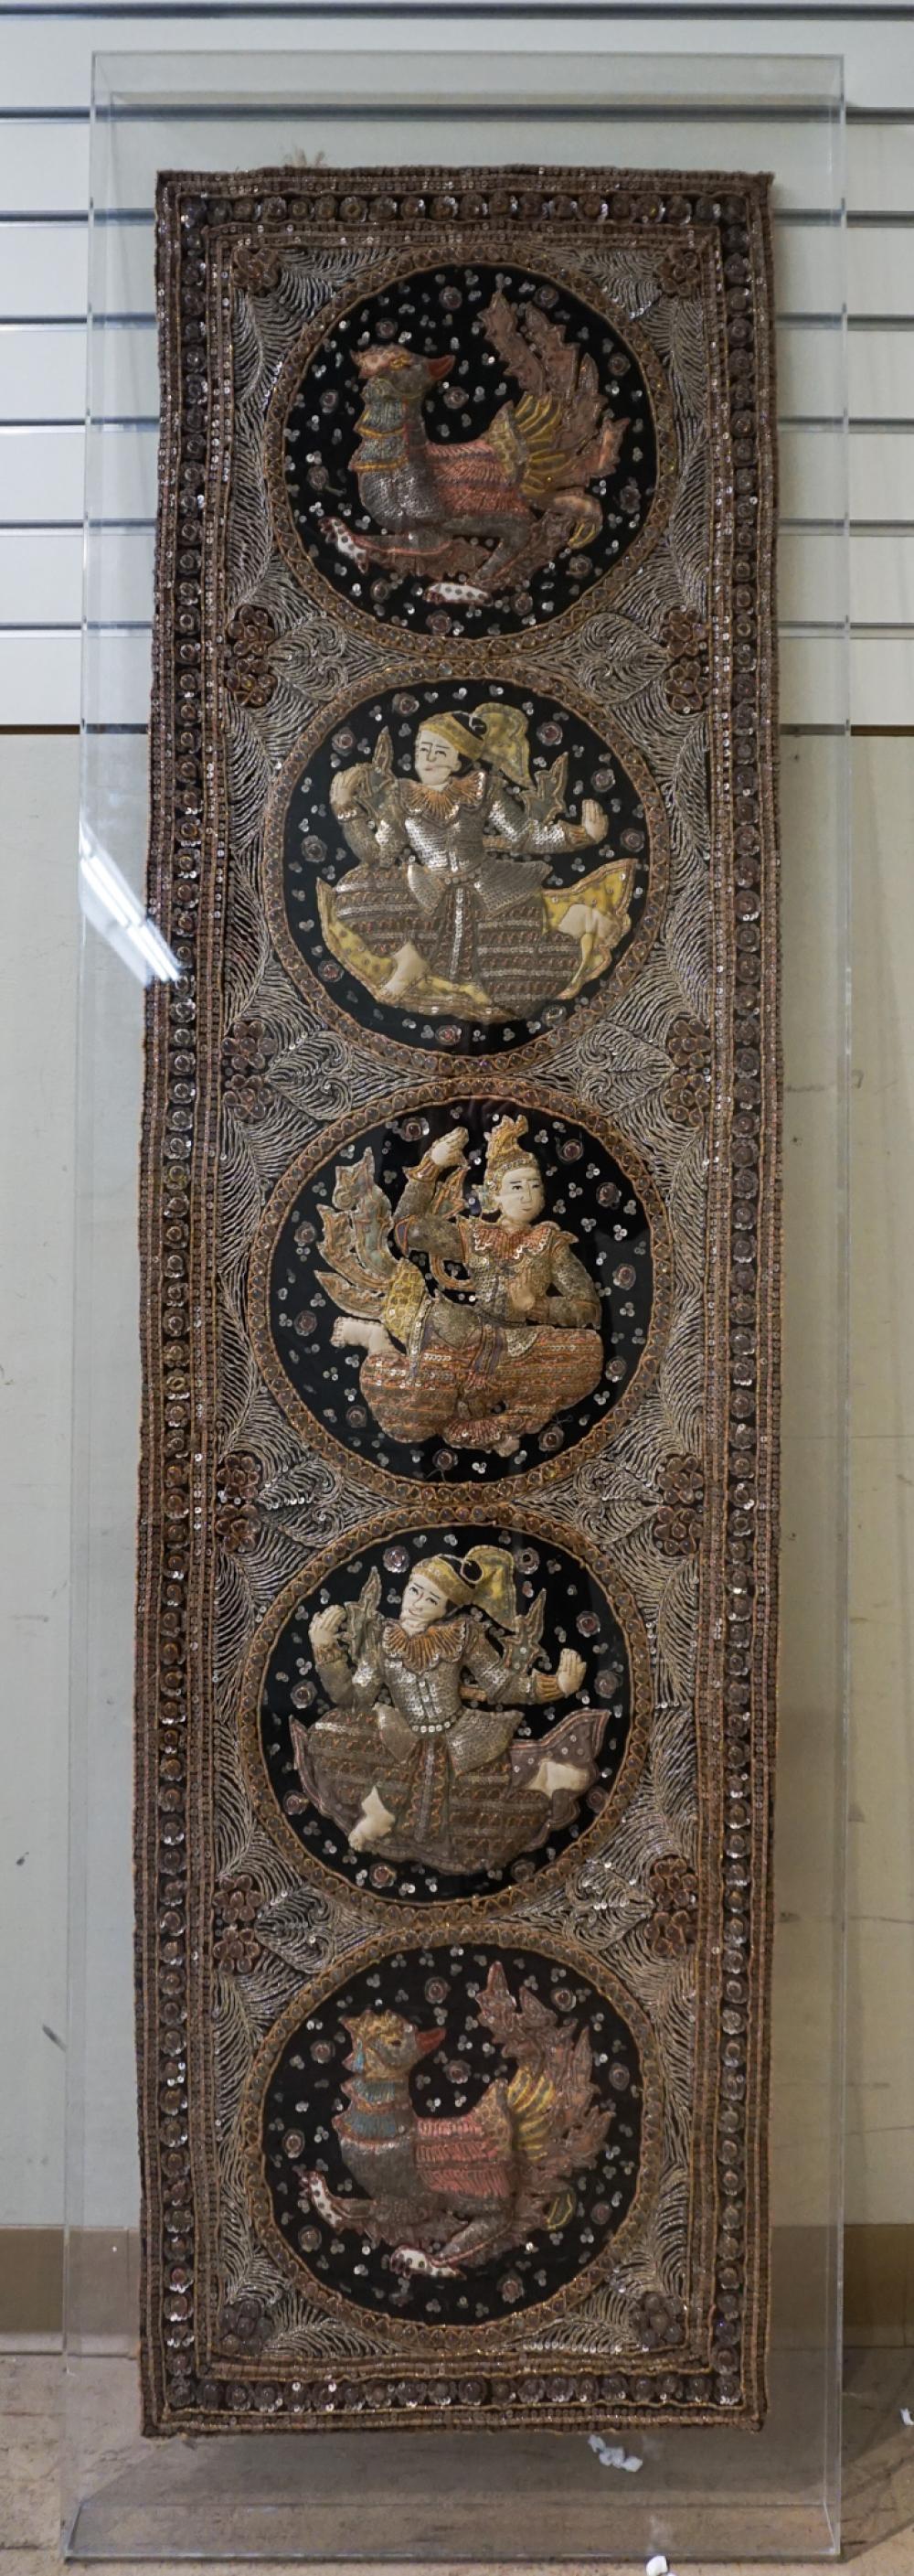 THAI STUFFED SEQUINED PANEL OF 3295a2